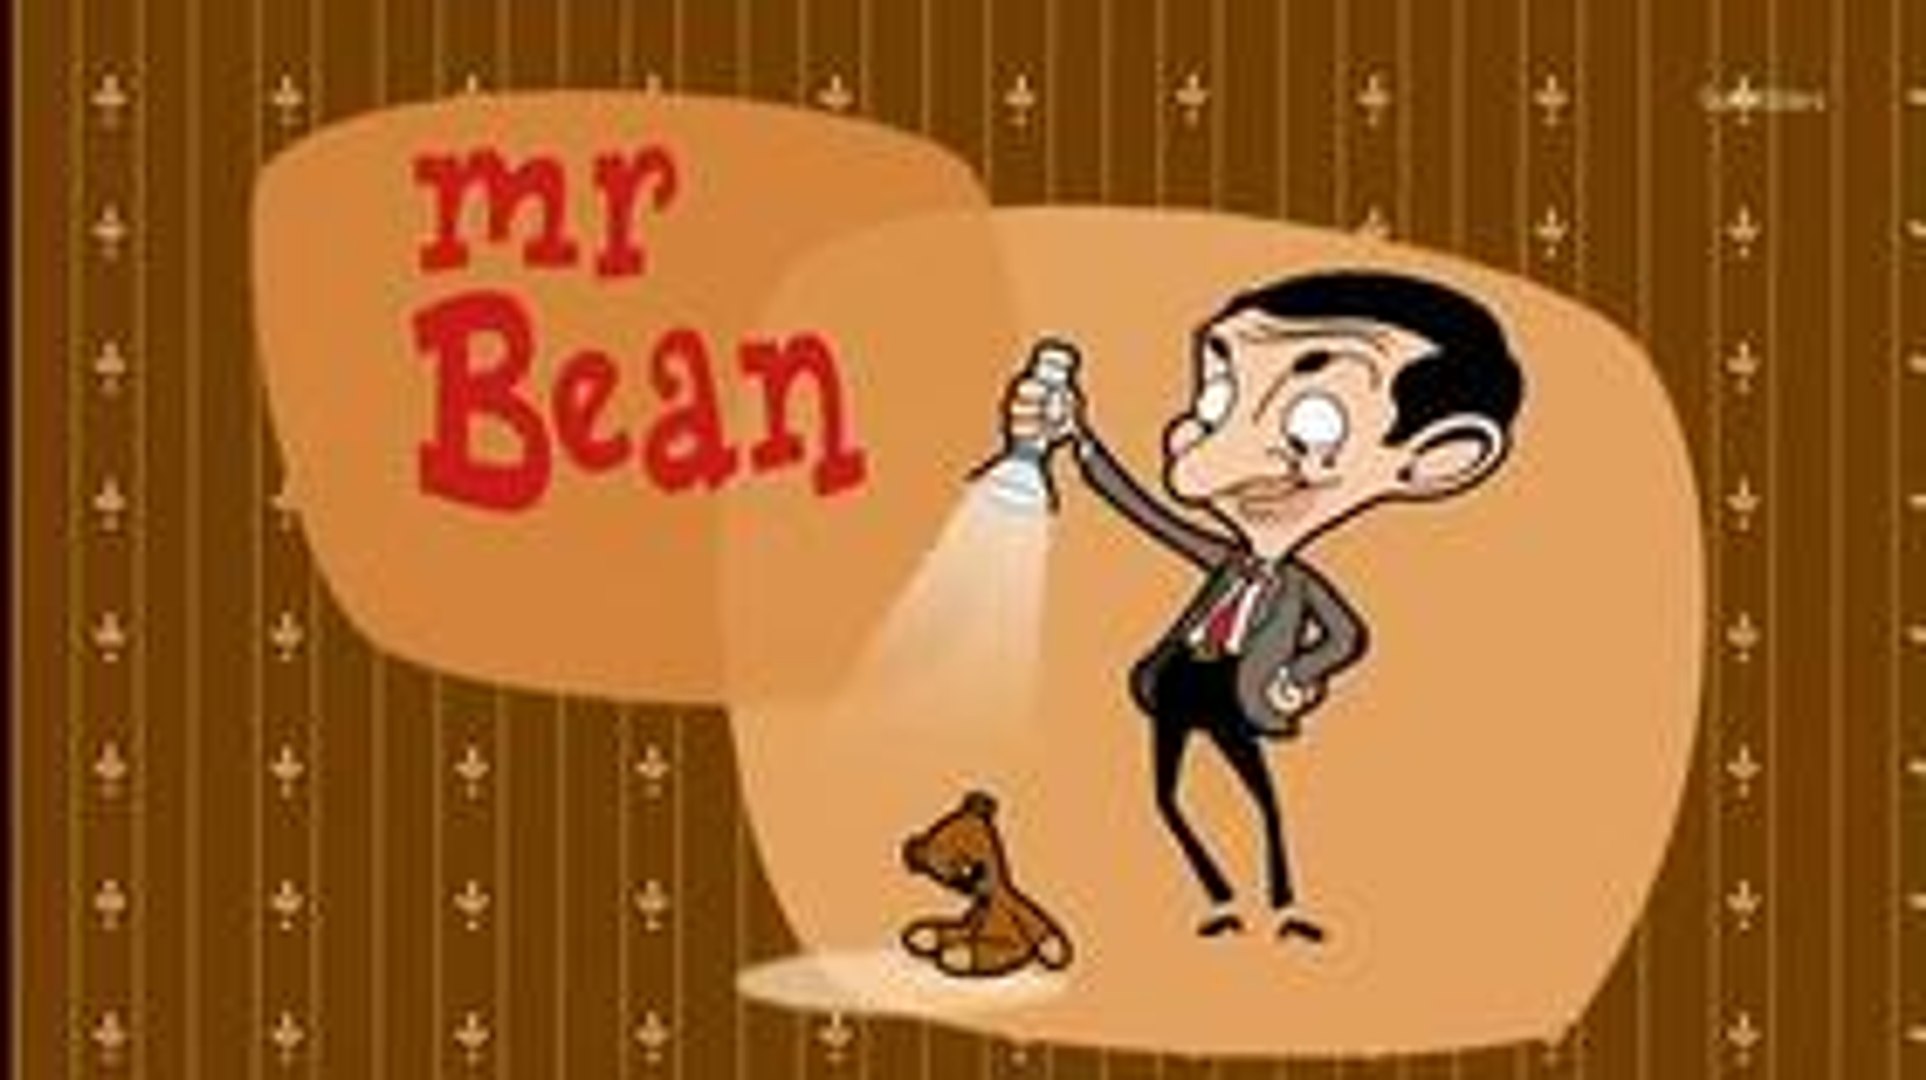 Mr. Bean: The Animated Series HINDI Series 2 Episode 26 - Taxi Bean - video  Dailymotion